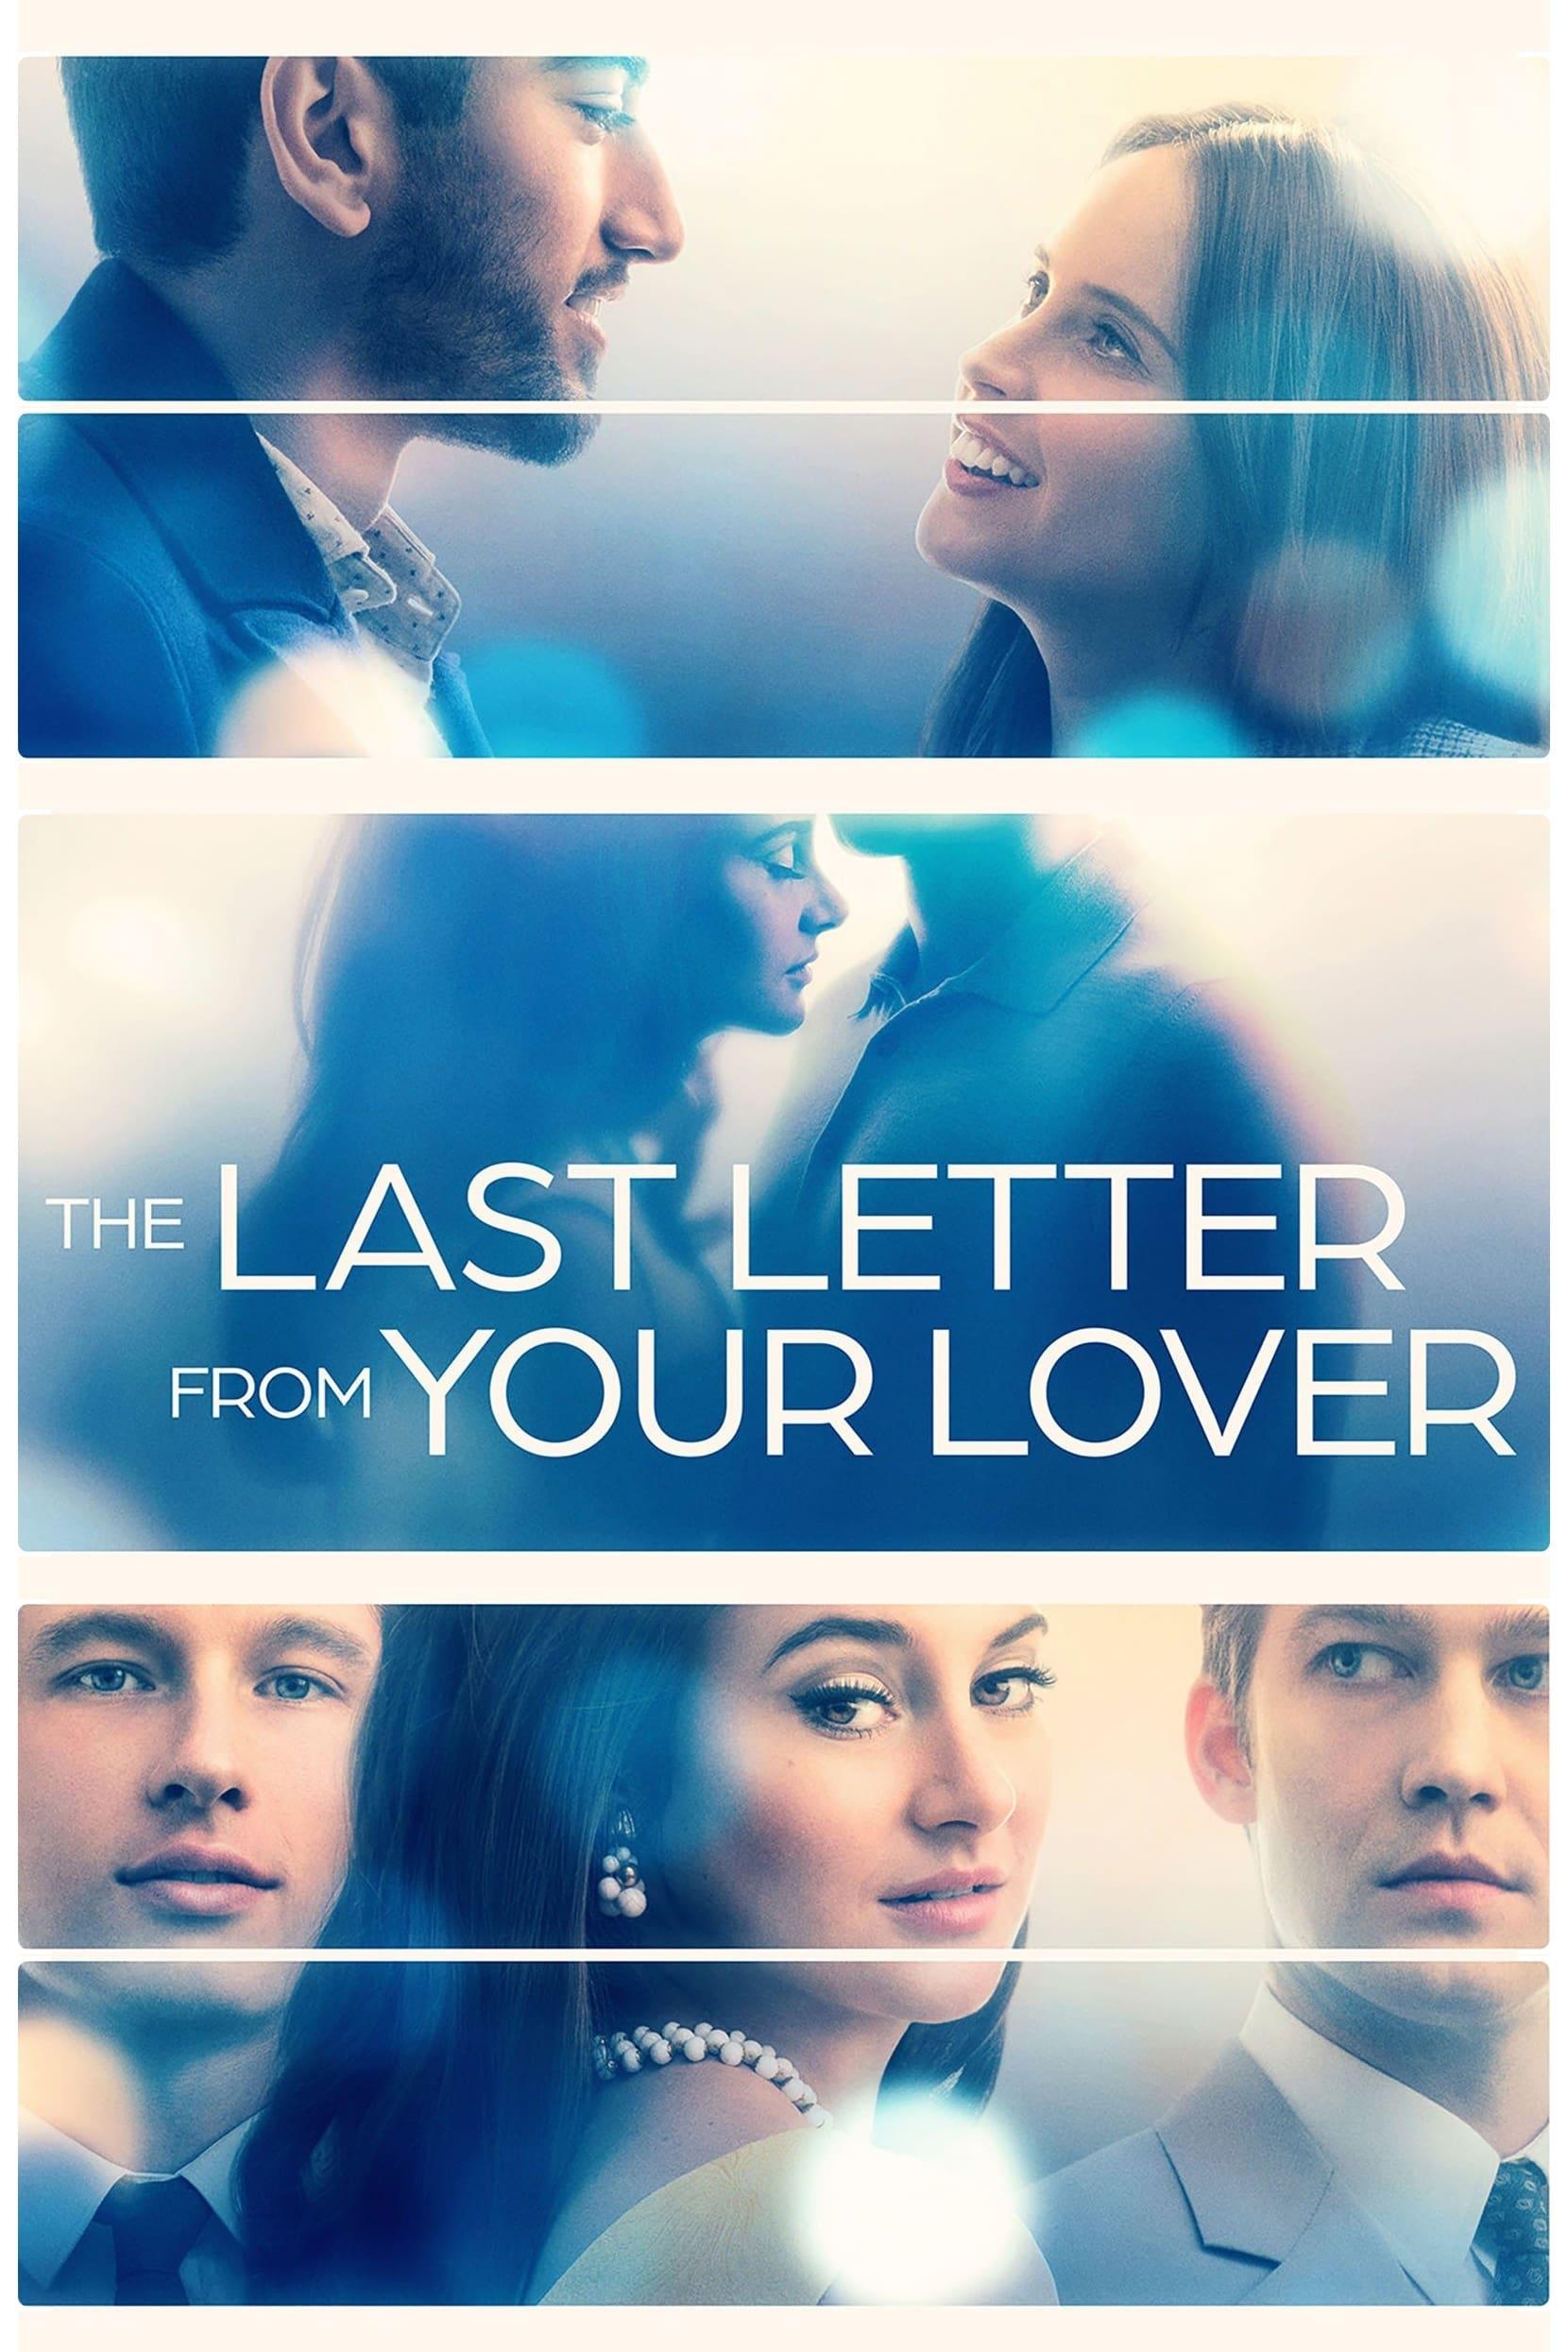 Poster phim The last letter from your lover. (Nguồn: Internet)